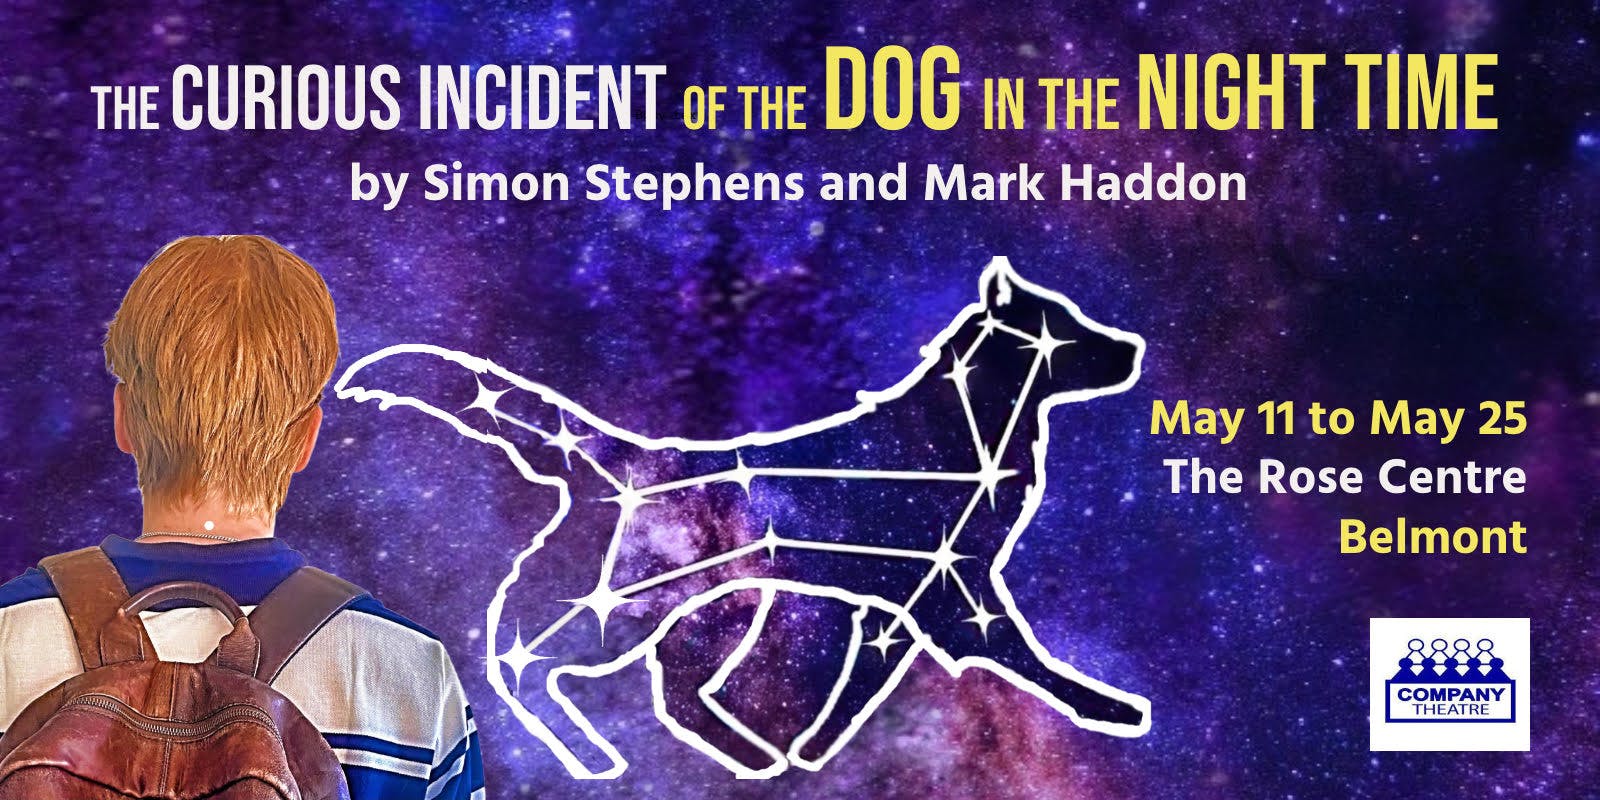 Curious Incident of the Dog in the Night-Time by Mark Haddon